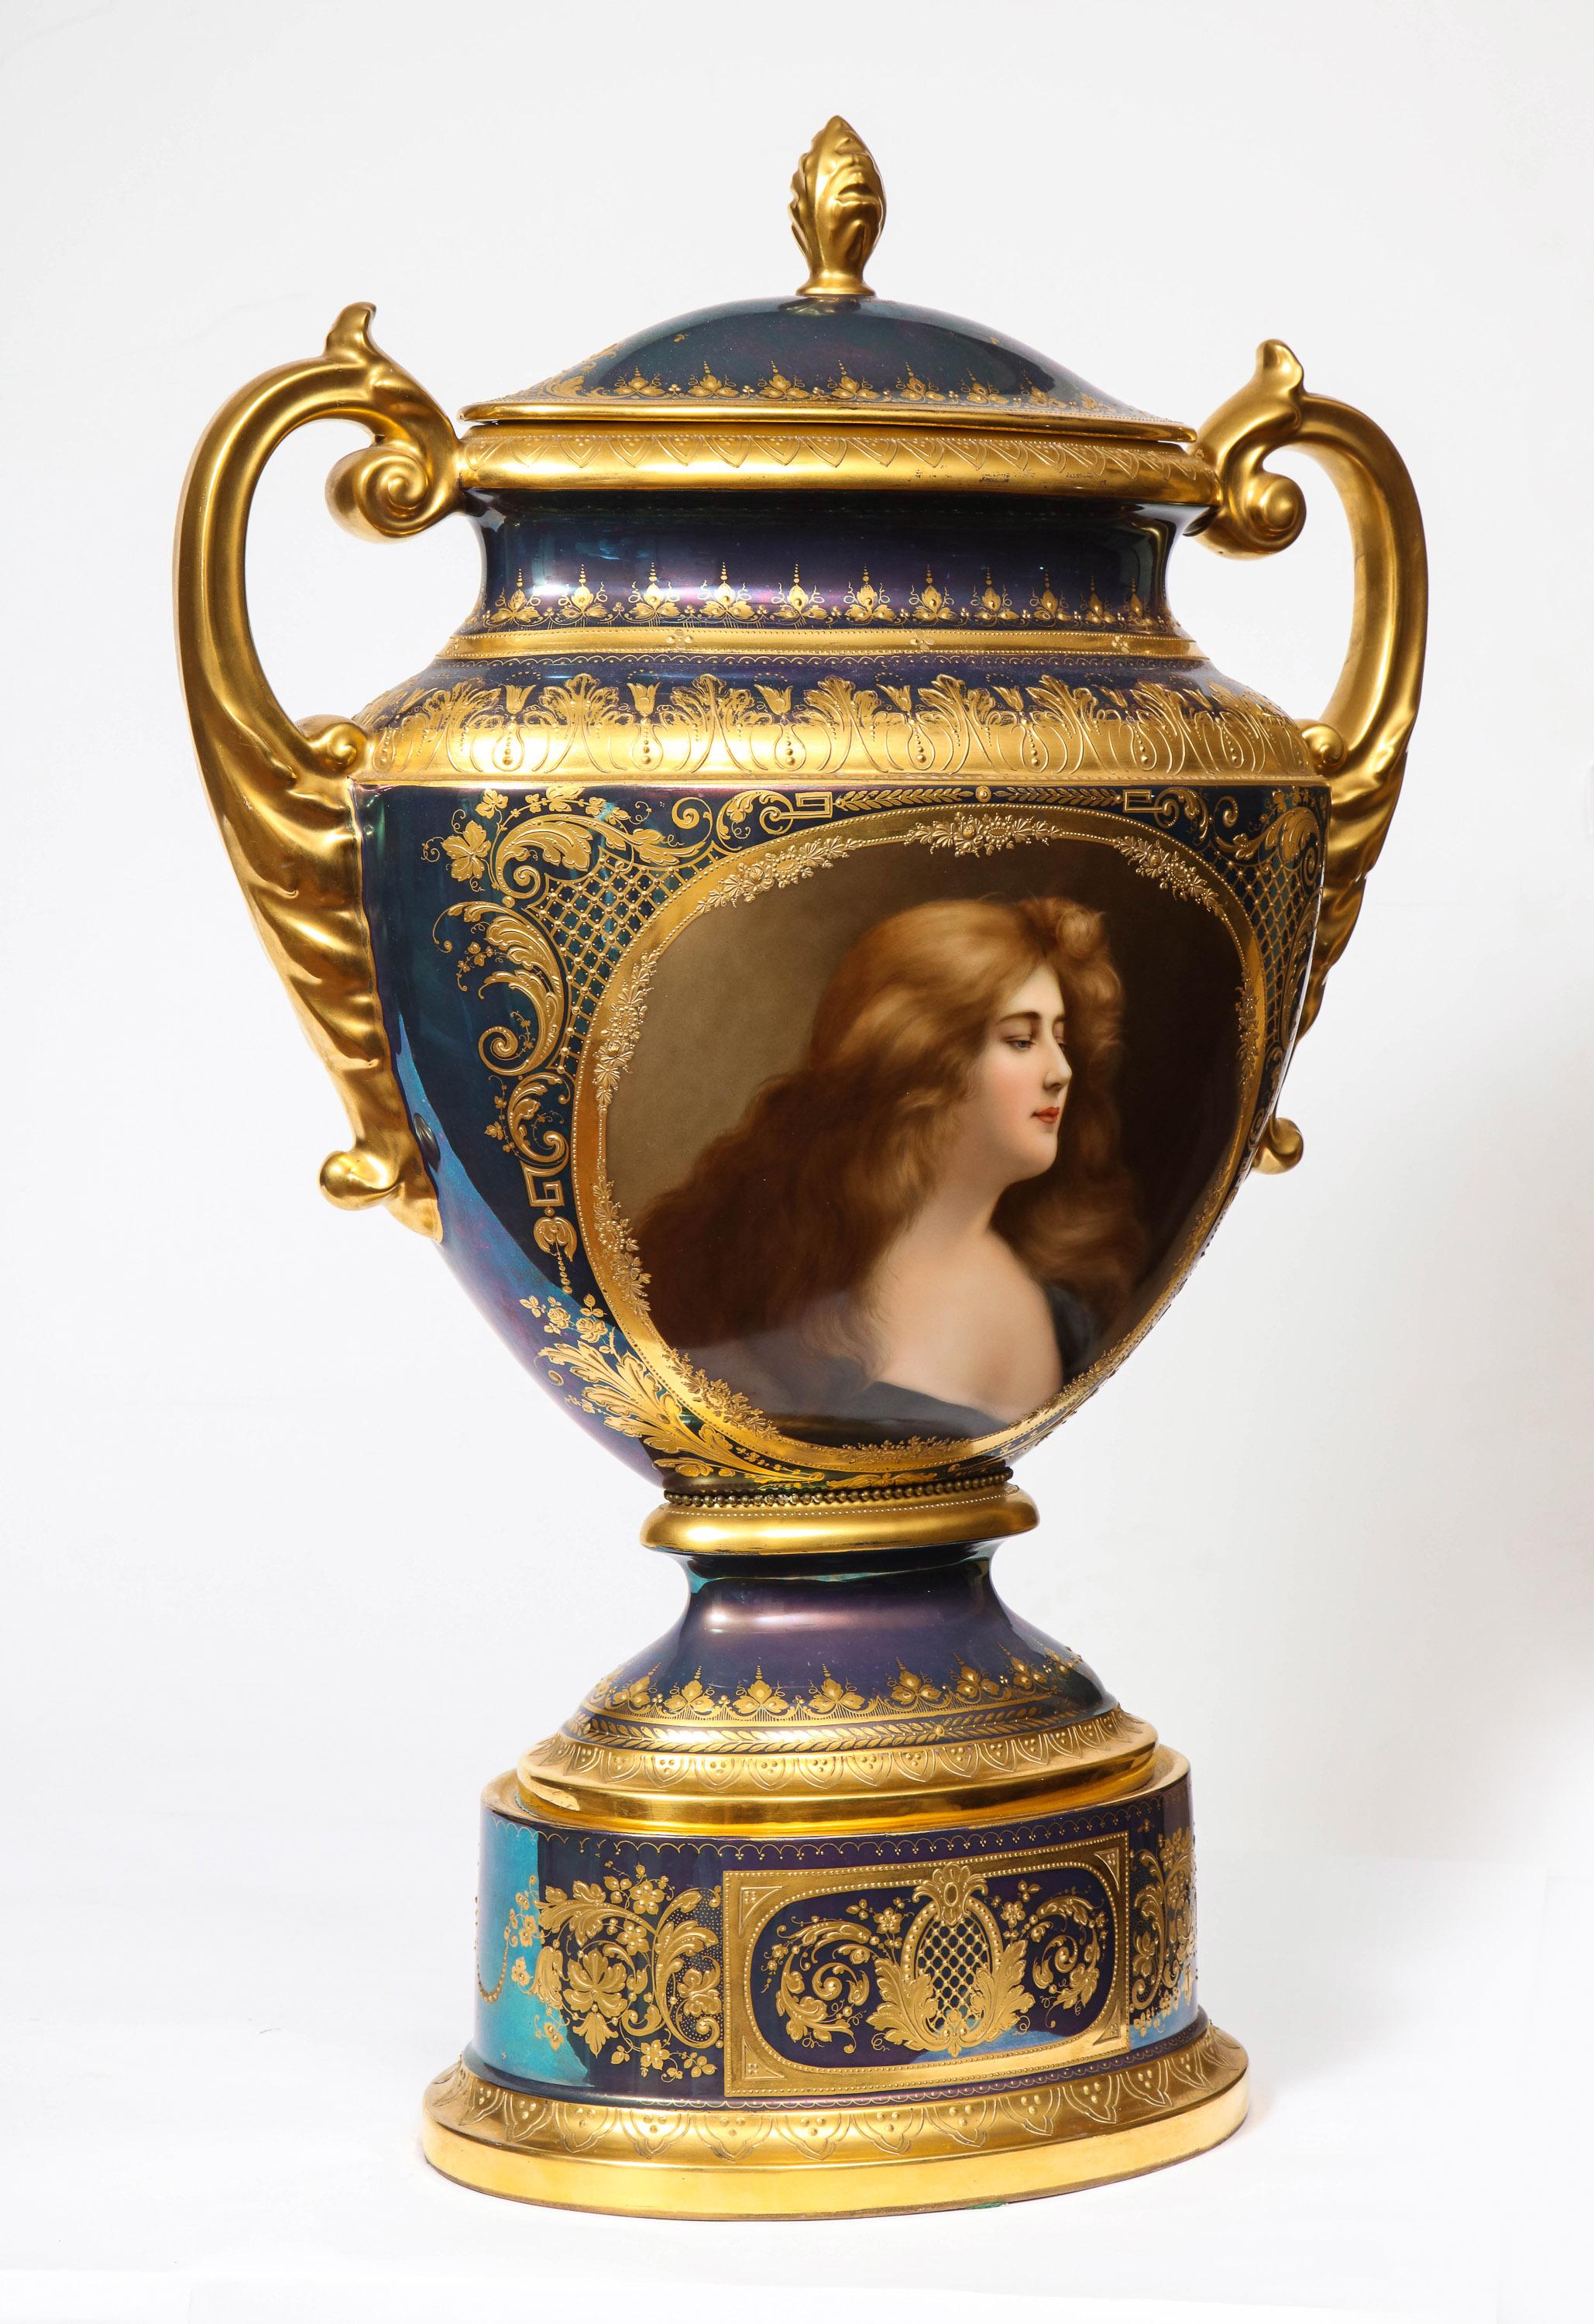 A monumental Royal Vienna Iridescent porcelain portrait vase and cover, Wagner, circa 1880.

This Royal Vienna Urn features an exceptional iridescent lustre, of flattened, 2 handled form, having an exquisite female allegorical hand-painted portrait